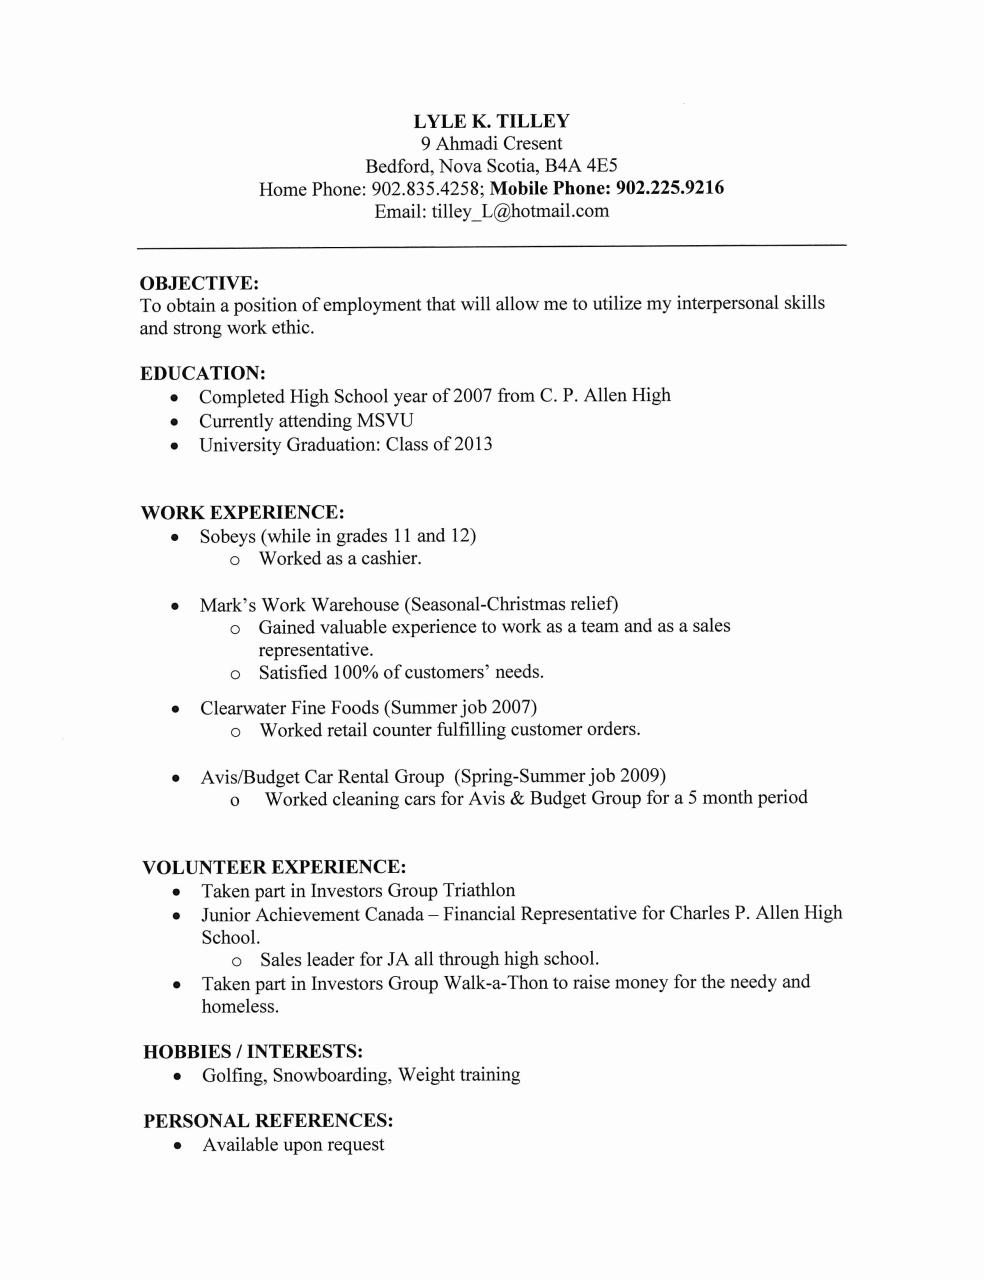 How To Write A Resume For A Highschool Graduate With No Experience